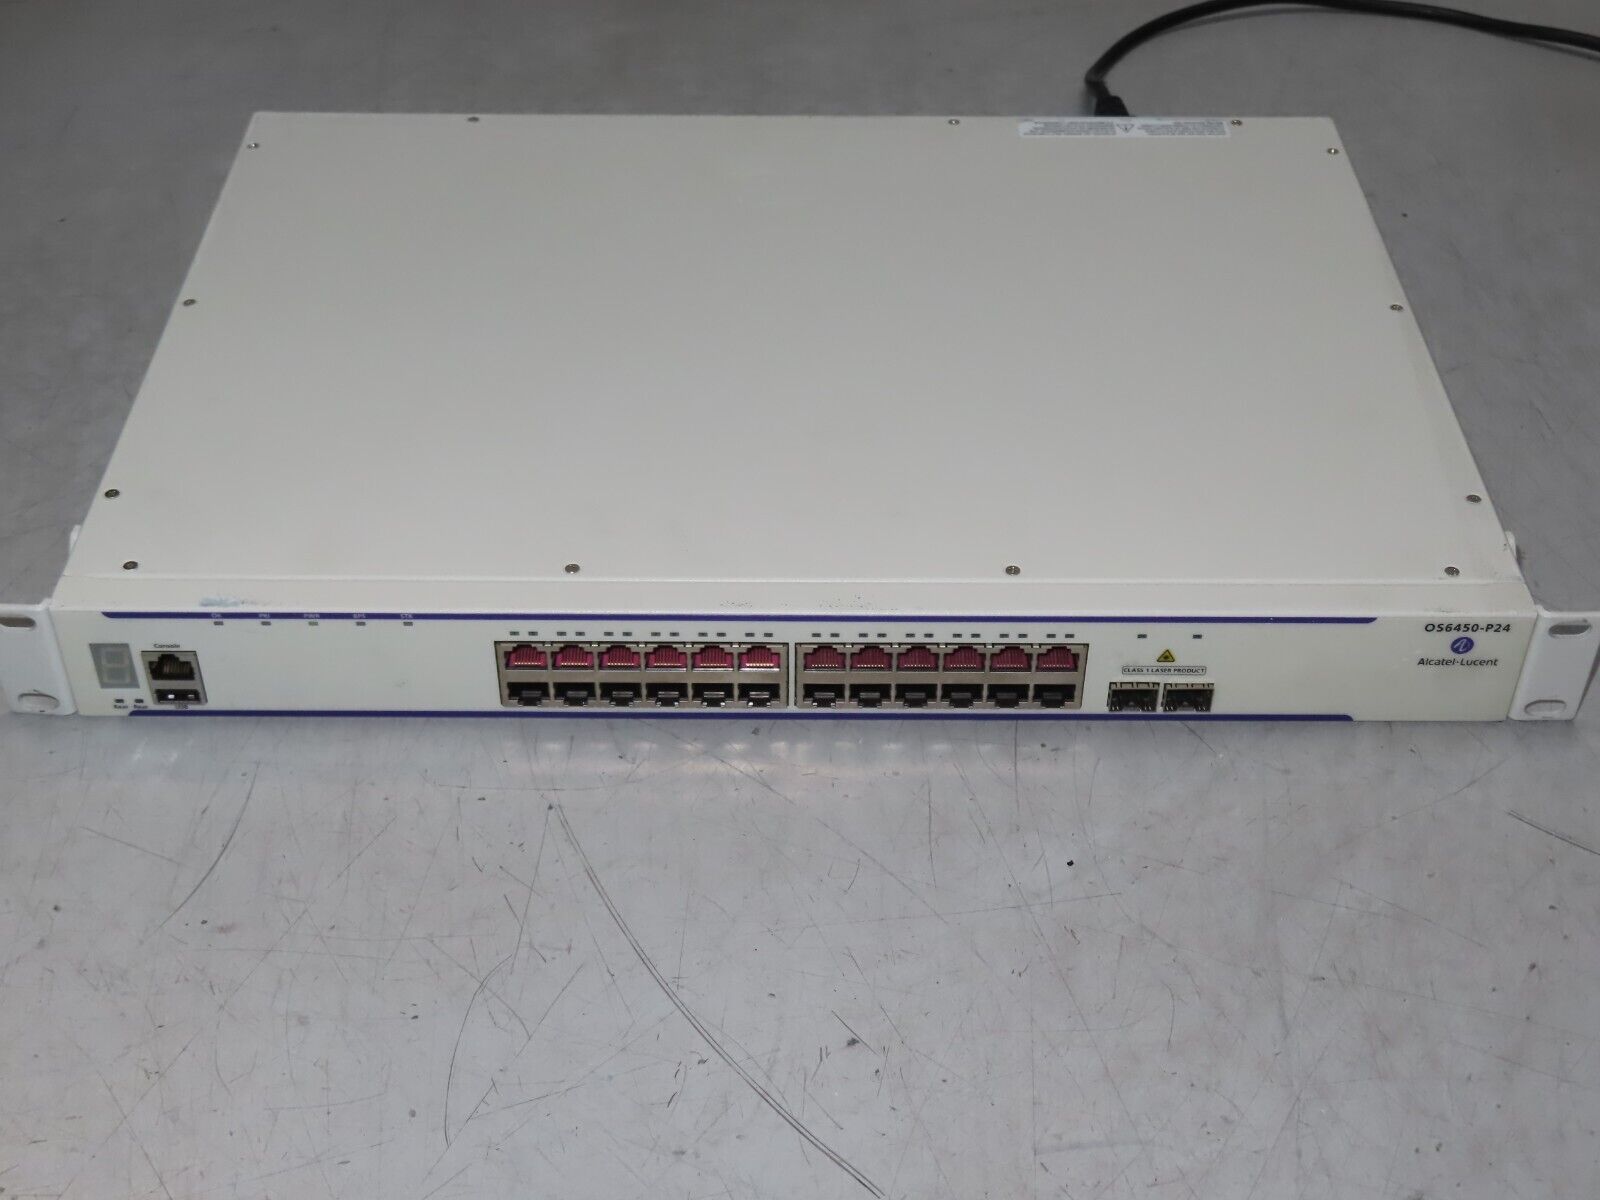 Alcatel-Lucent 24 Ports OmniSwitch OS6450-P24